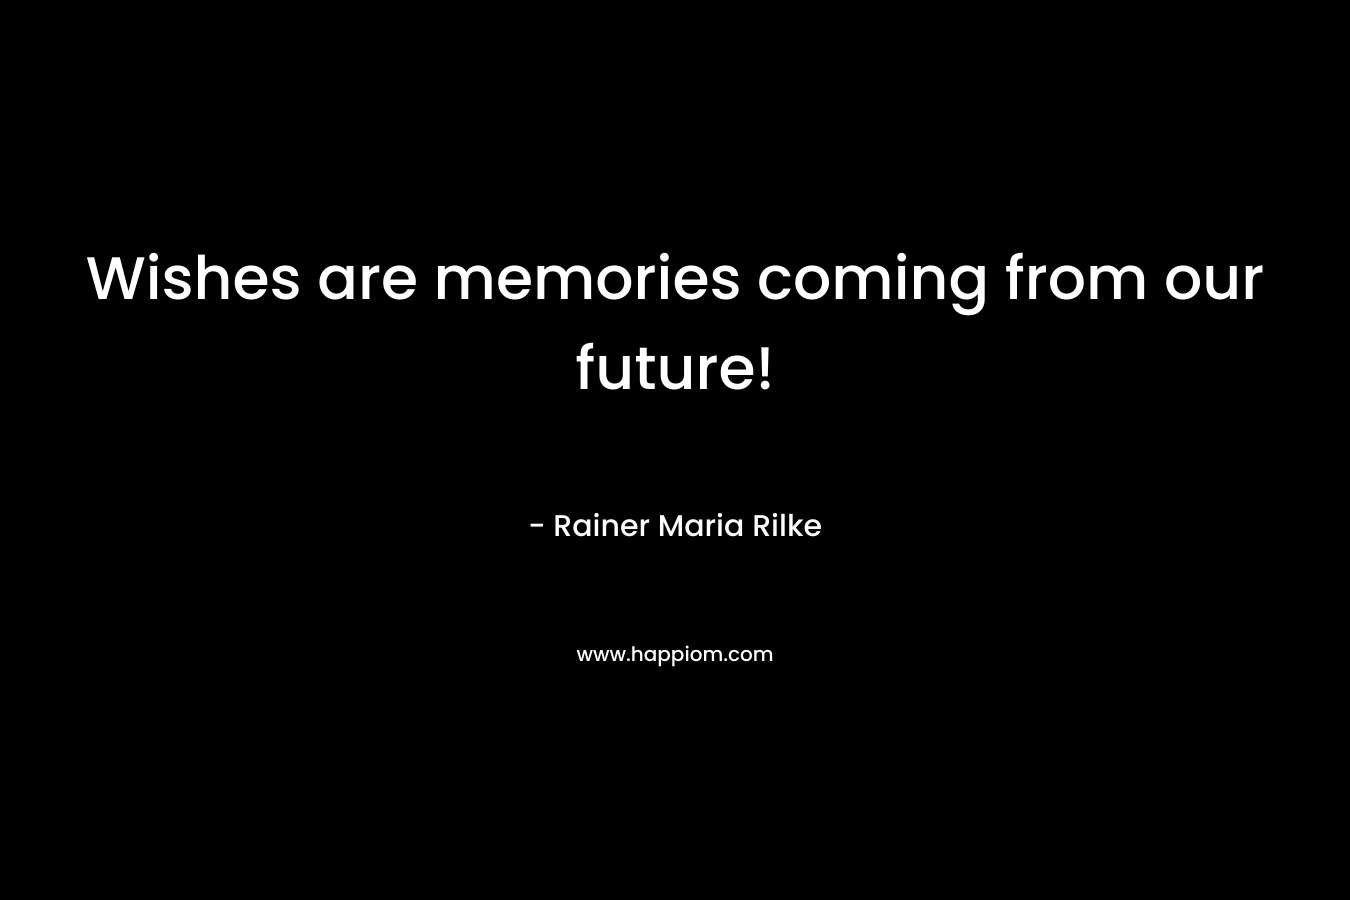 Wishes are memories coming from our future!